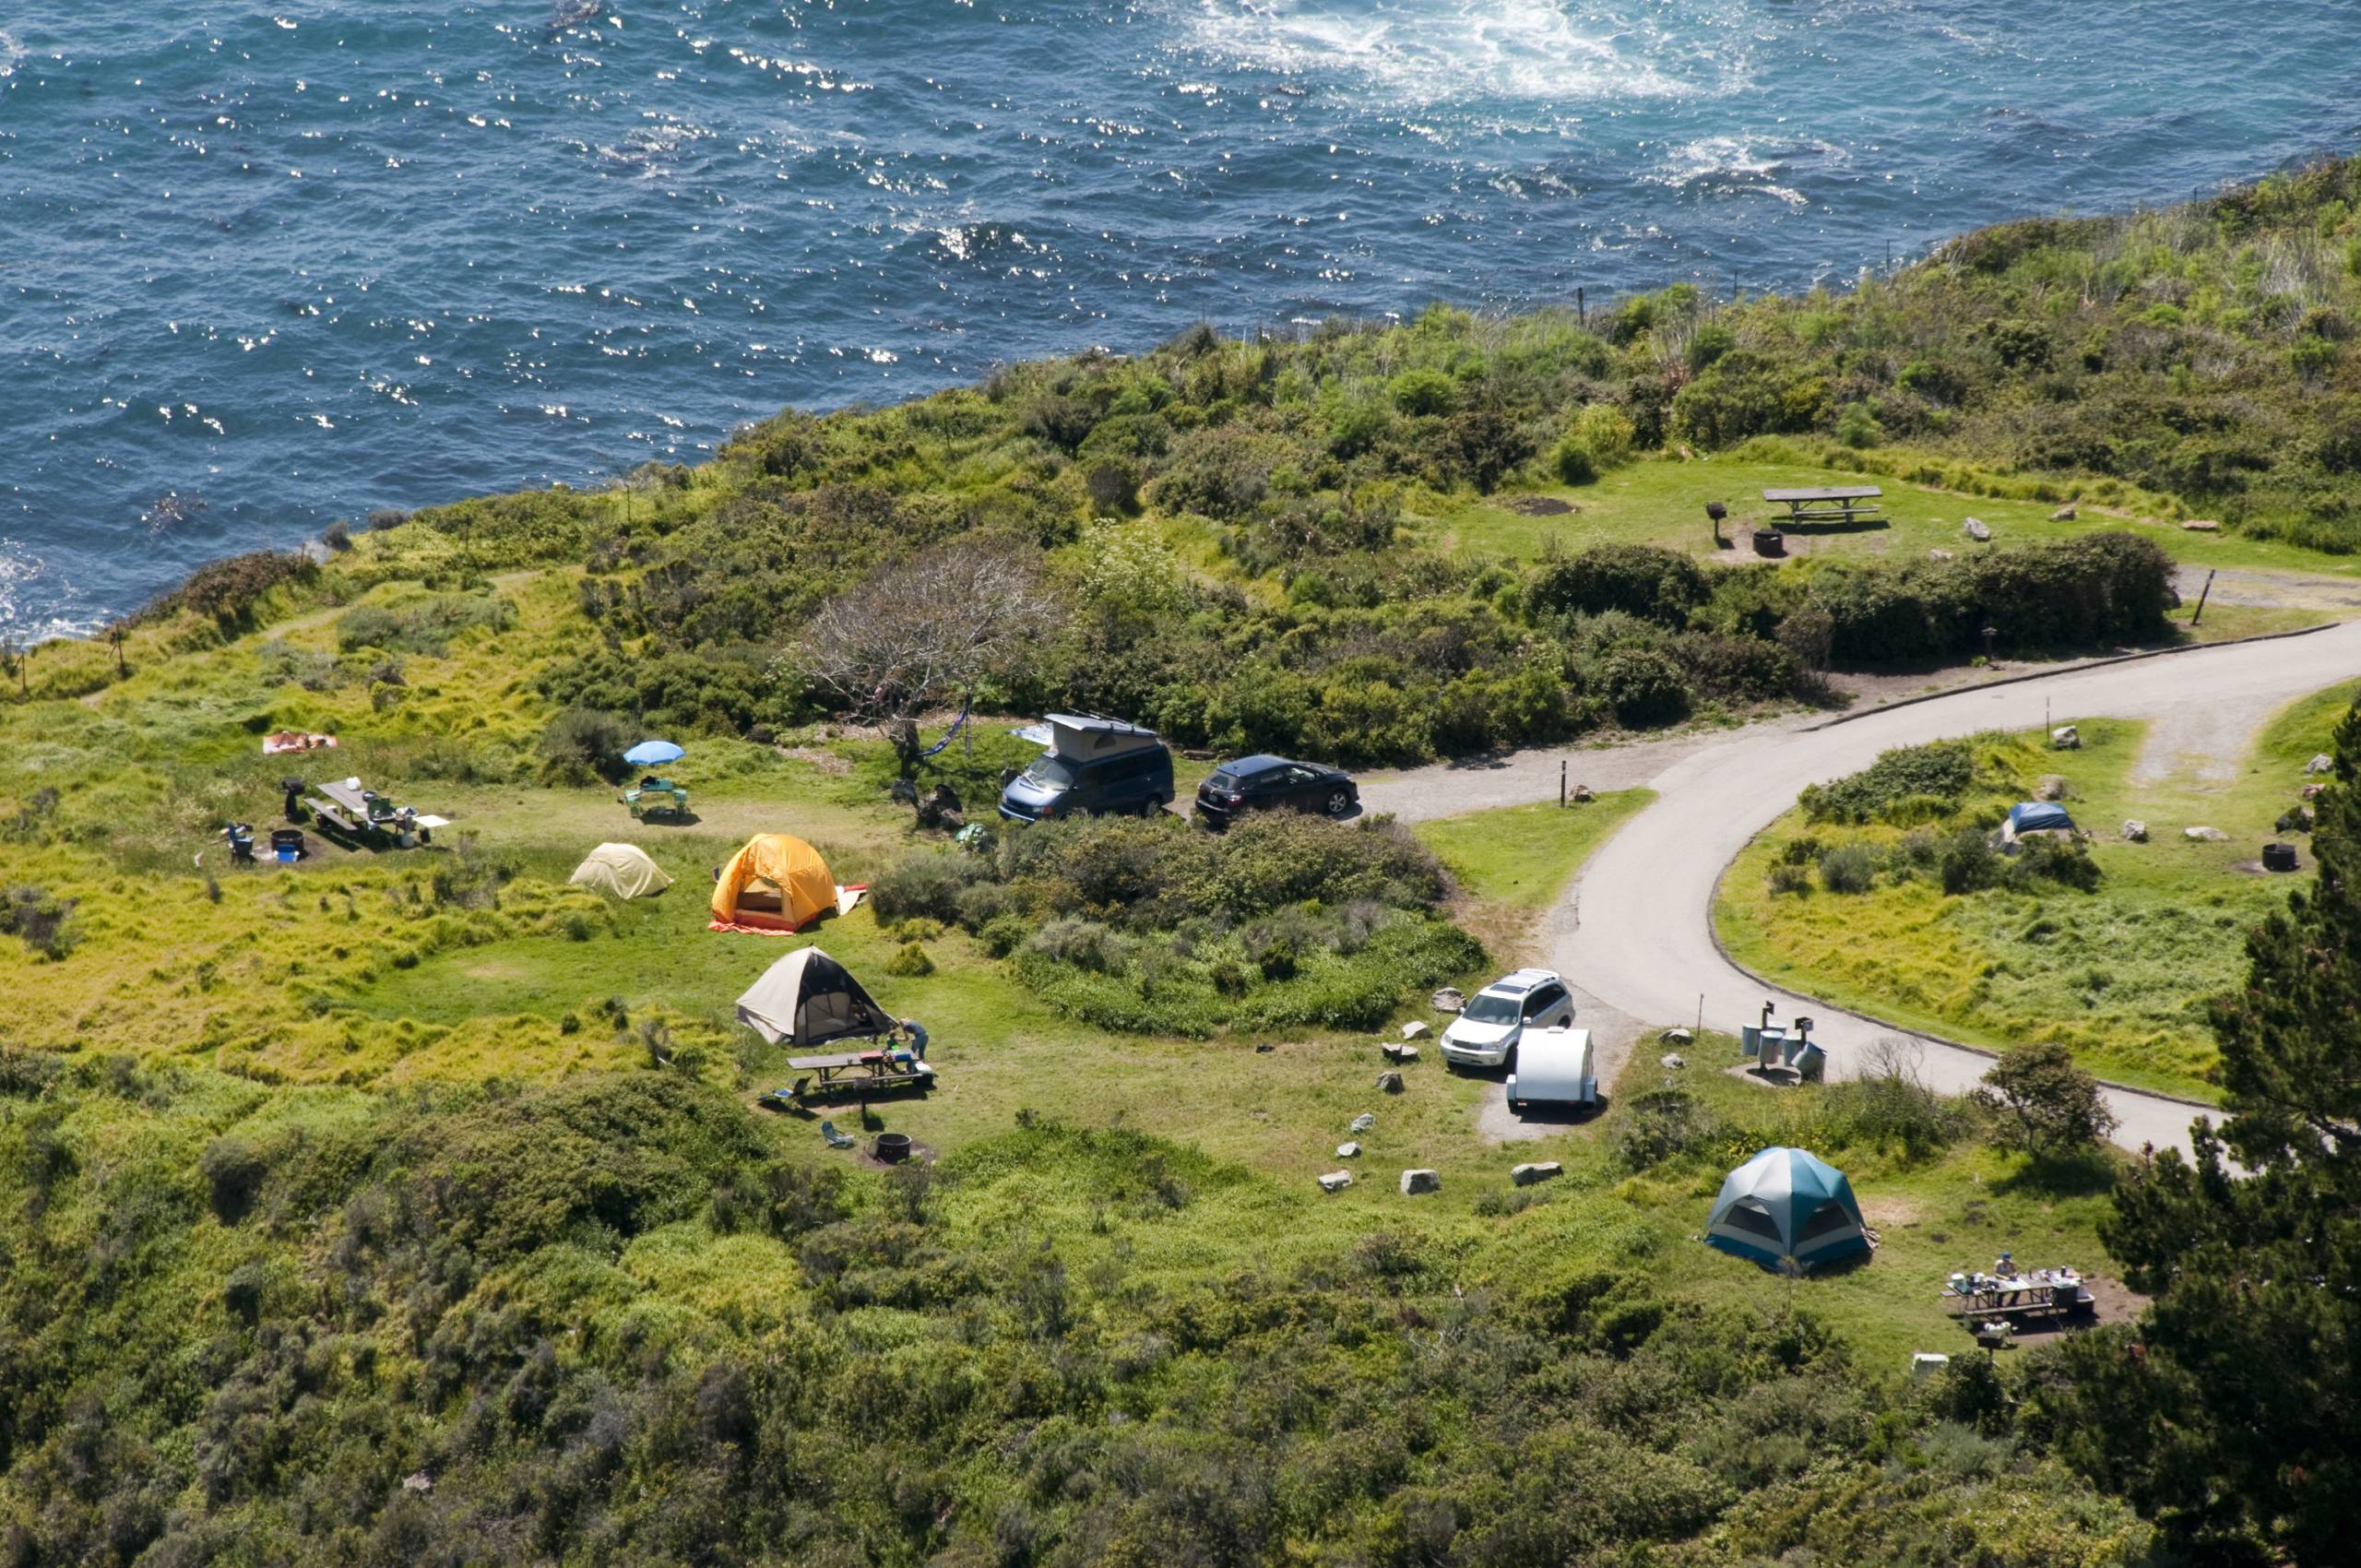 Tents by the sea seen from a distance above.